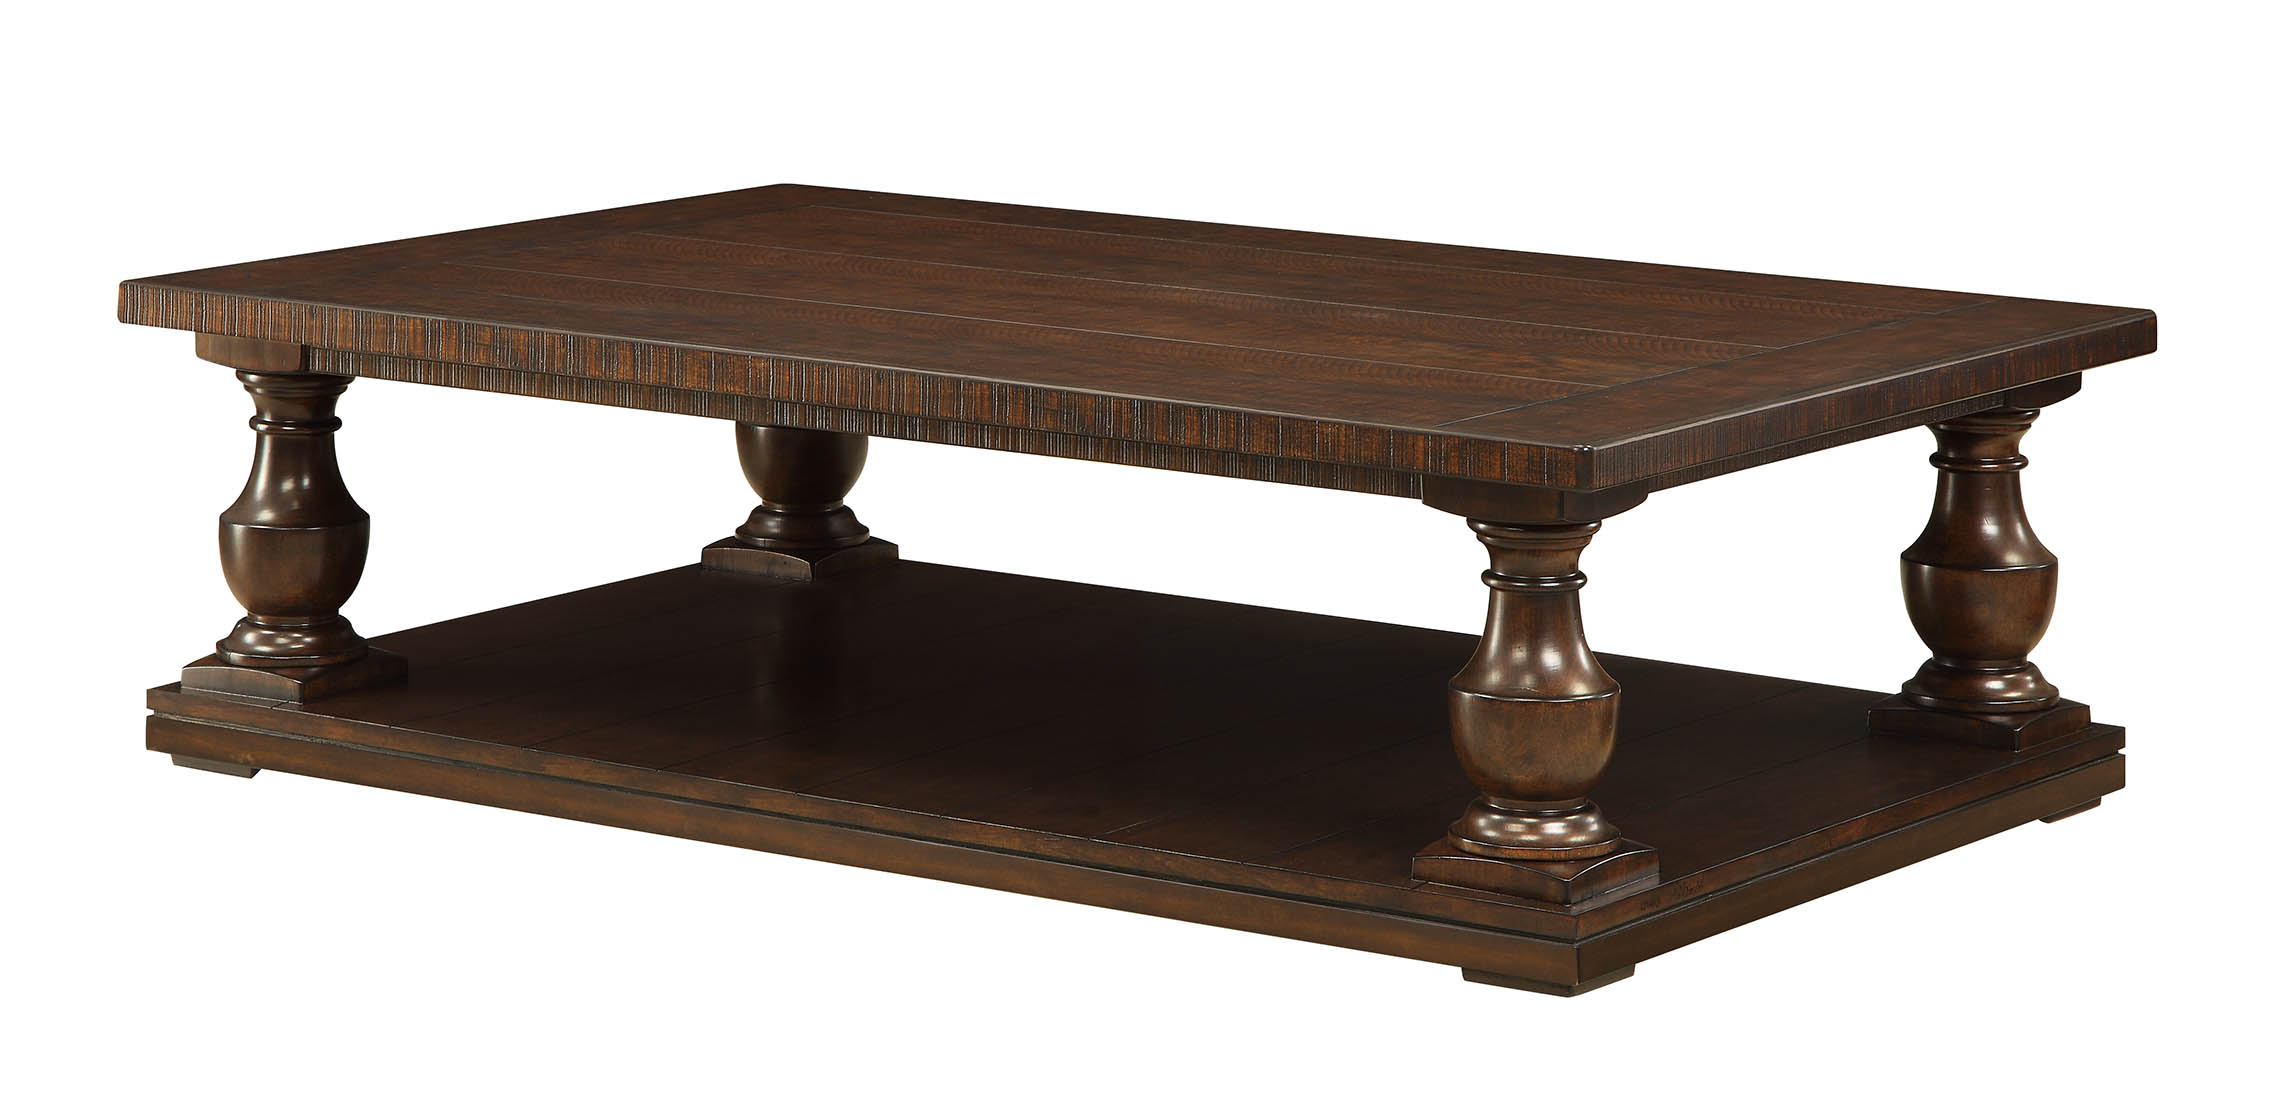 Weldon Pedestal Coffee Table throughout dimensions 2284 X 1097